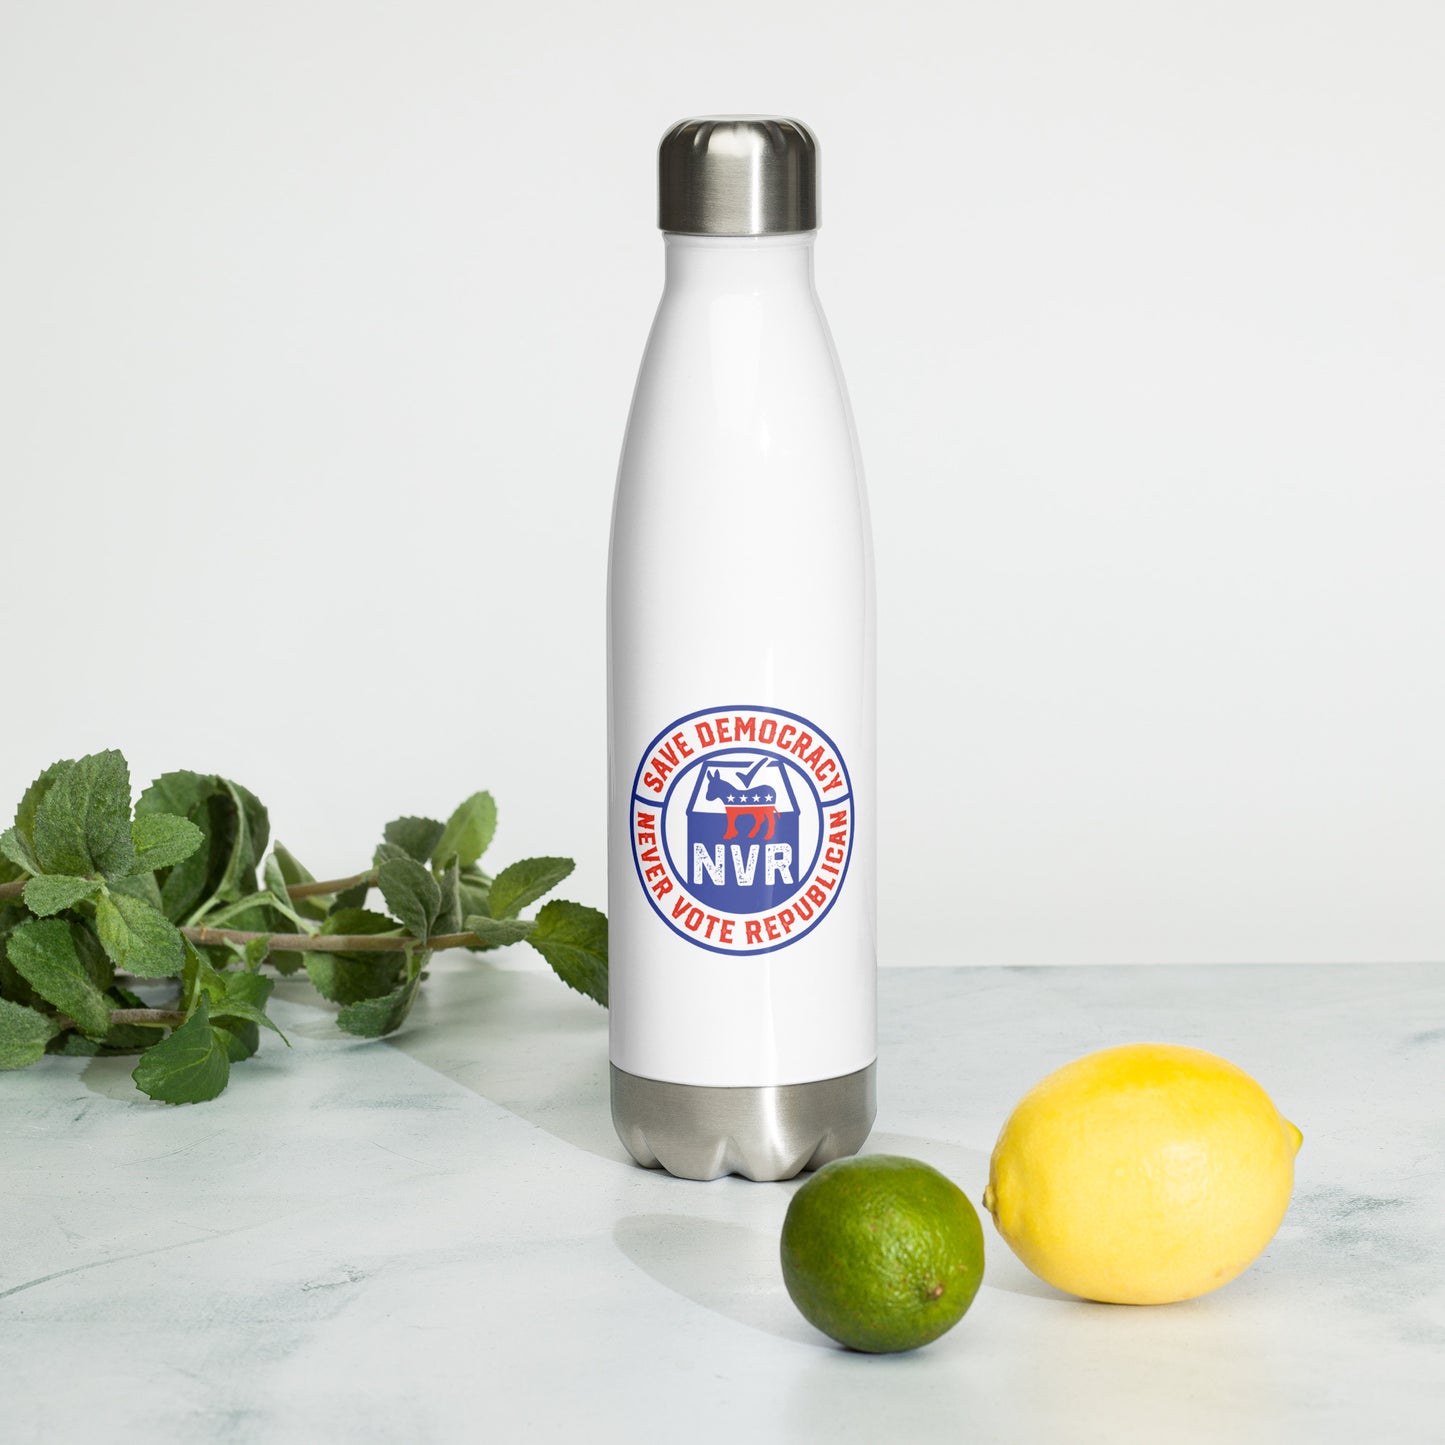 (NVR) Save Democracy Stainless Steel Water Bottle - FREE Shipping!